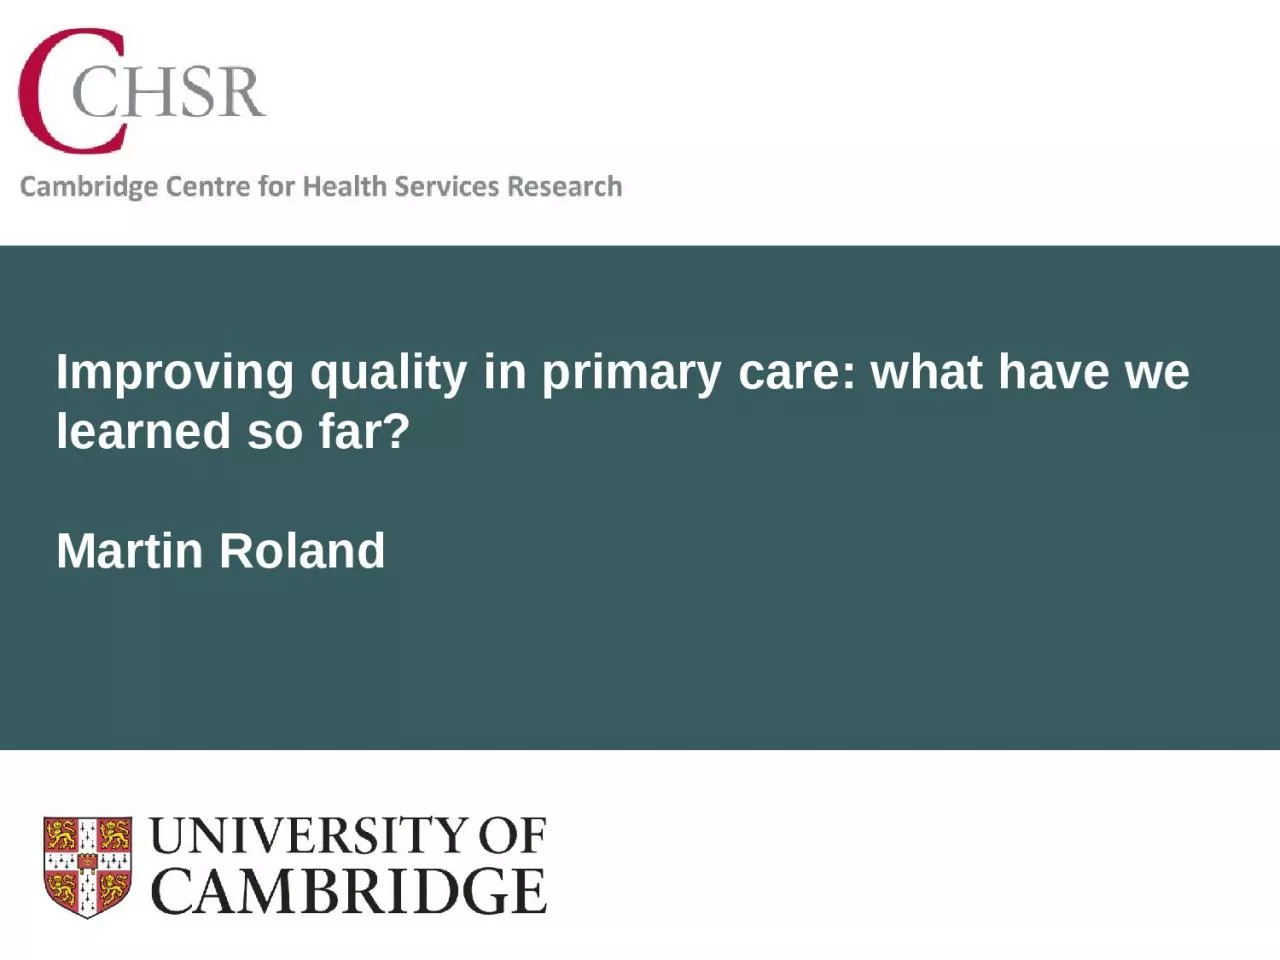 Improving quality in primary care: what have we learned so far?